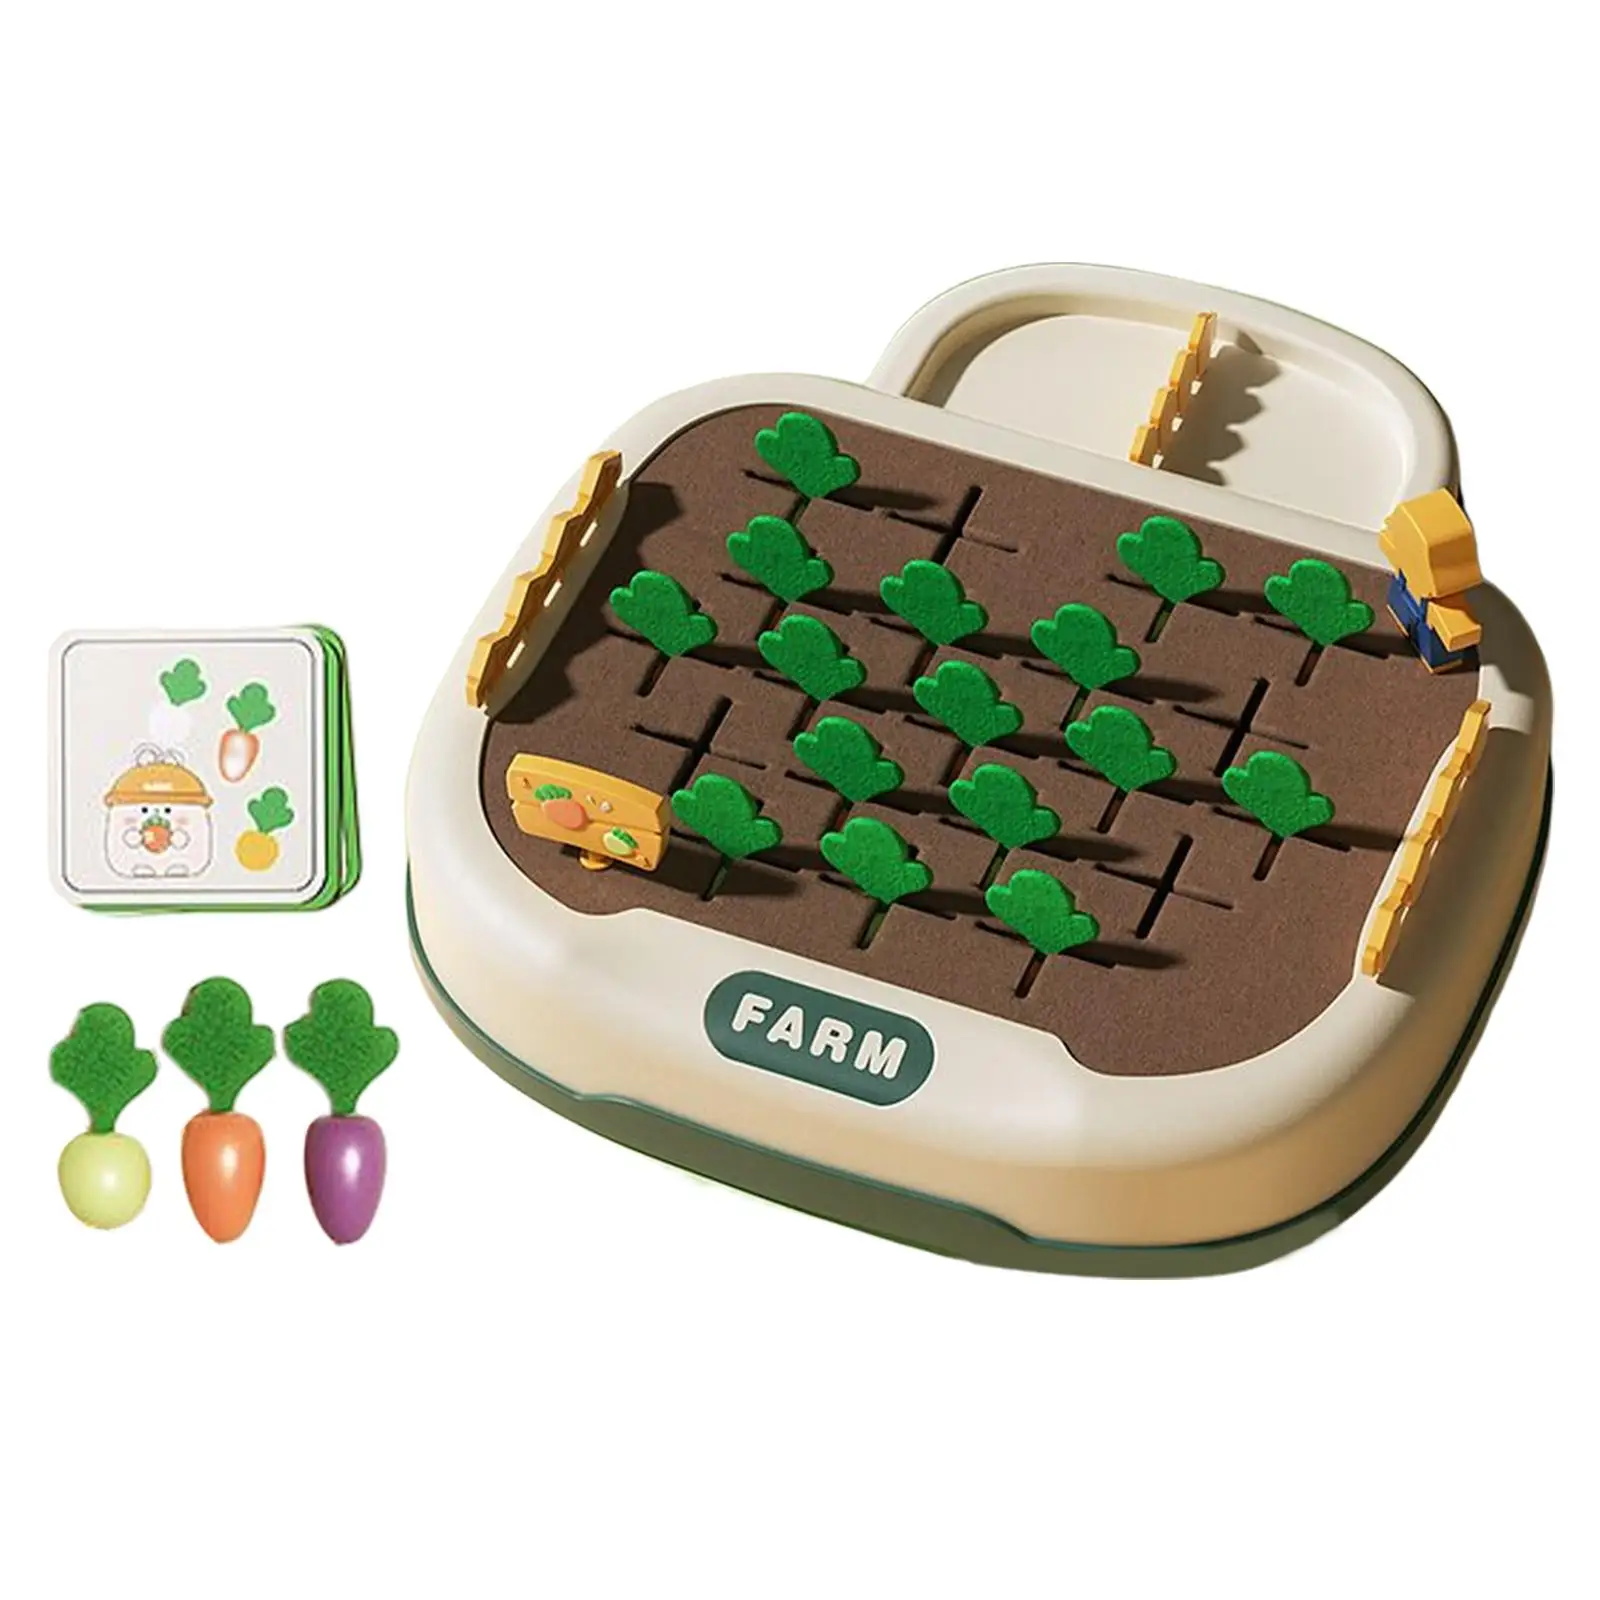 Montessori Balance Math Game Color Recognition Pulling Turnips Math Educational Number Toy Counting Game for Interaction Travel